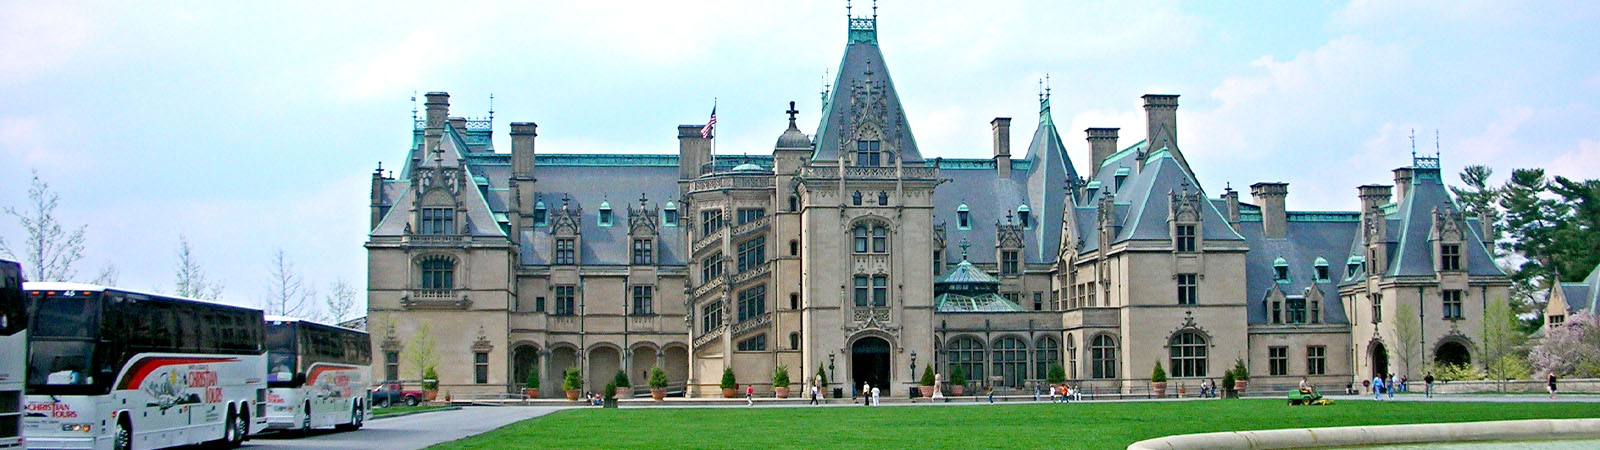 Biltmore Estate &
The Chihuly Exhibition